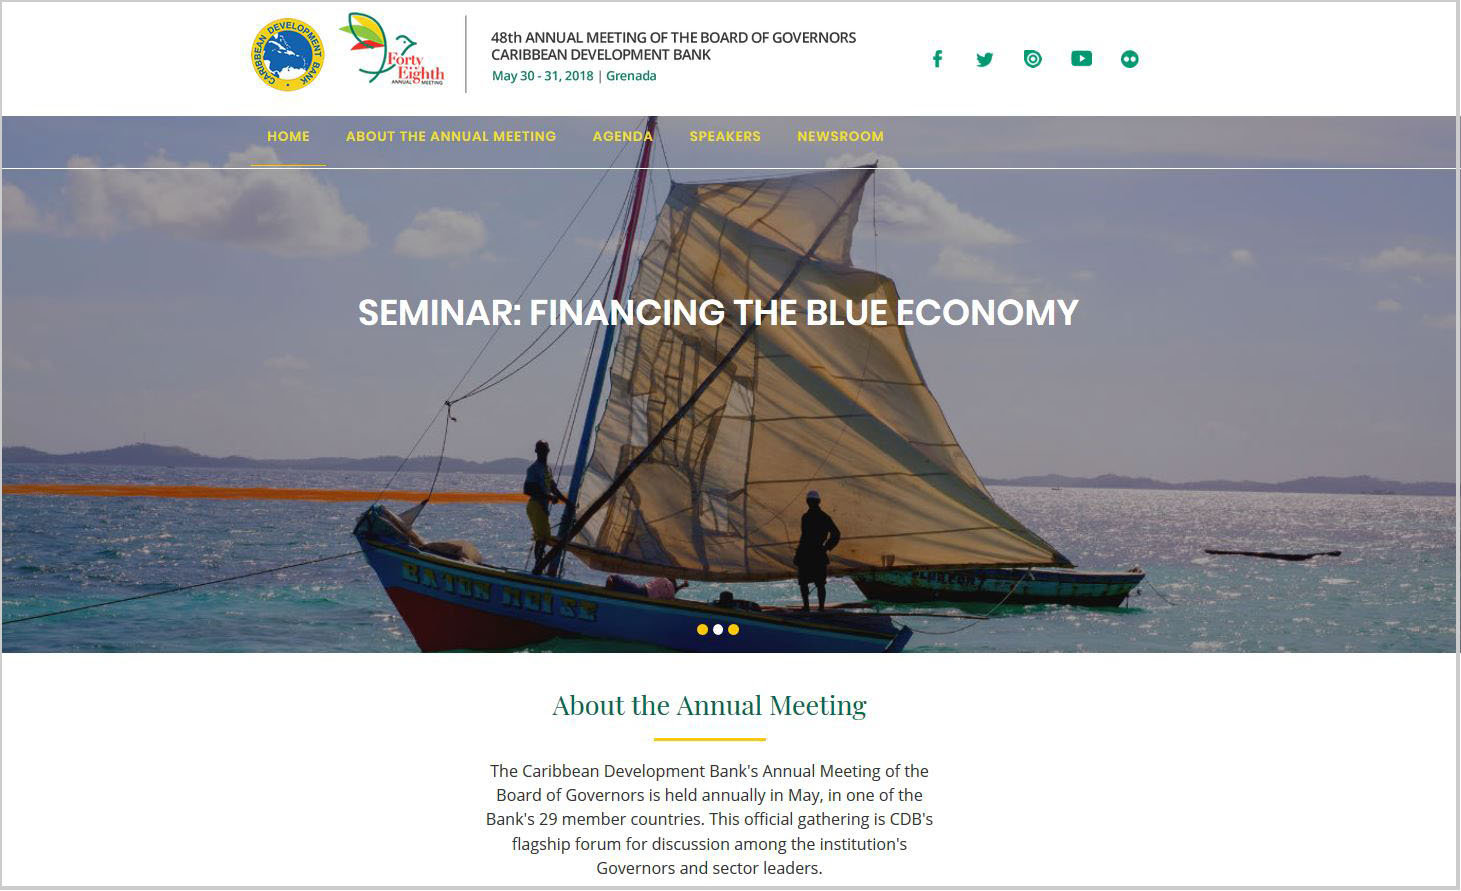 The dedicated Annual Meeting website, bog.caribank.org, and the complementing mobile app have been launched.